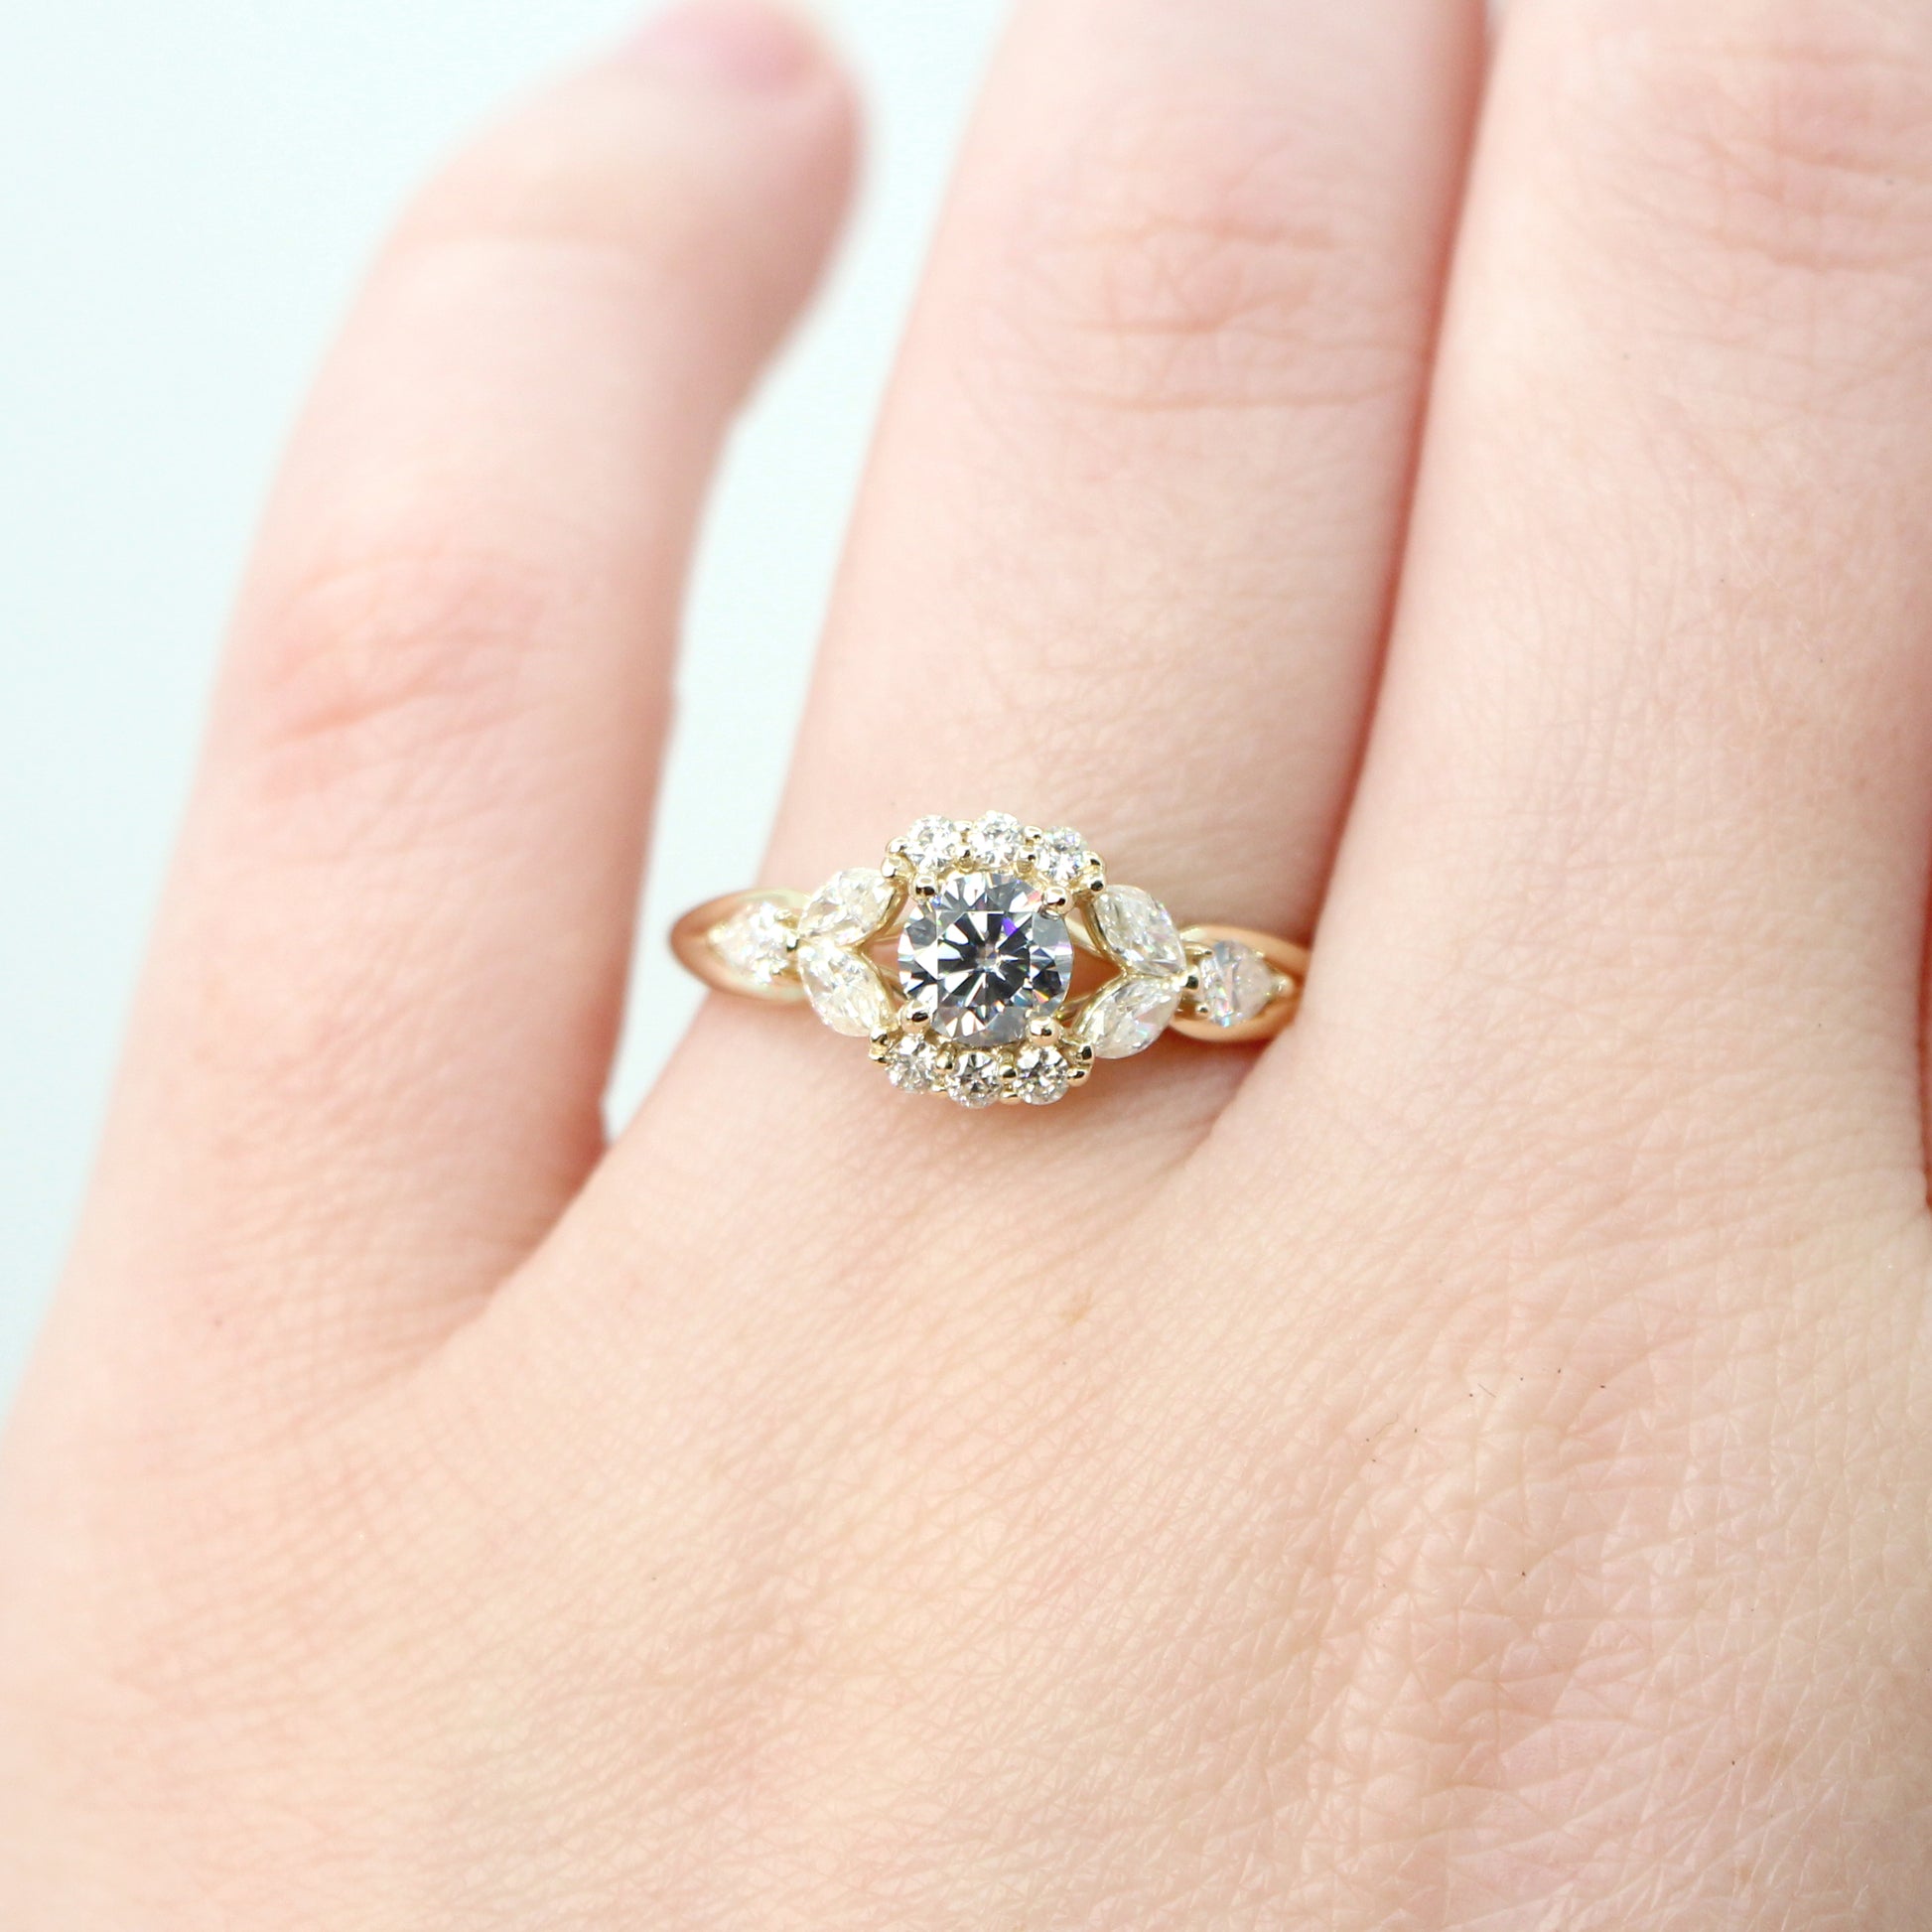 Endora Ring with a Round Gray Moissanite and Moissanite Accents - Made to Order, Choose Your Gold Tone - Midwinter Co. Alternative Bridal Rings and Modern Fine Jewelry